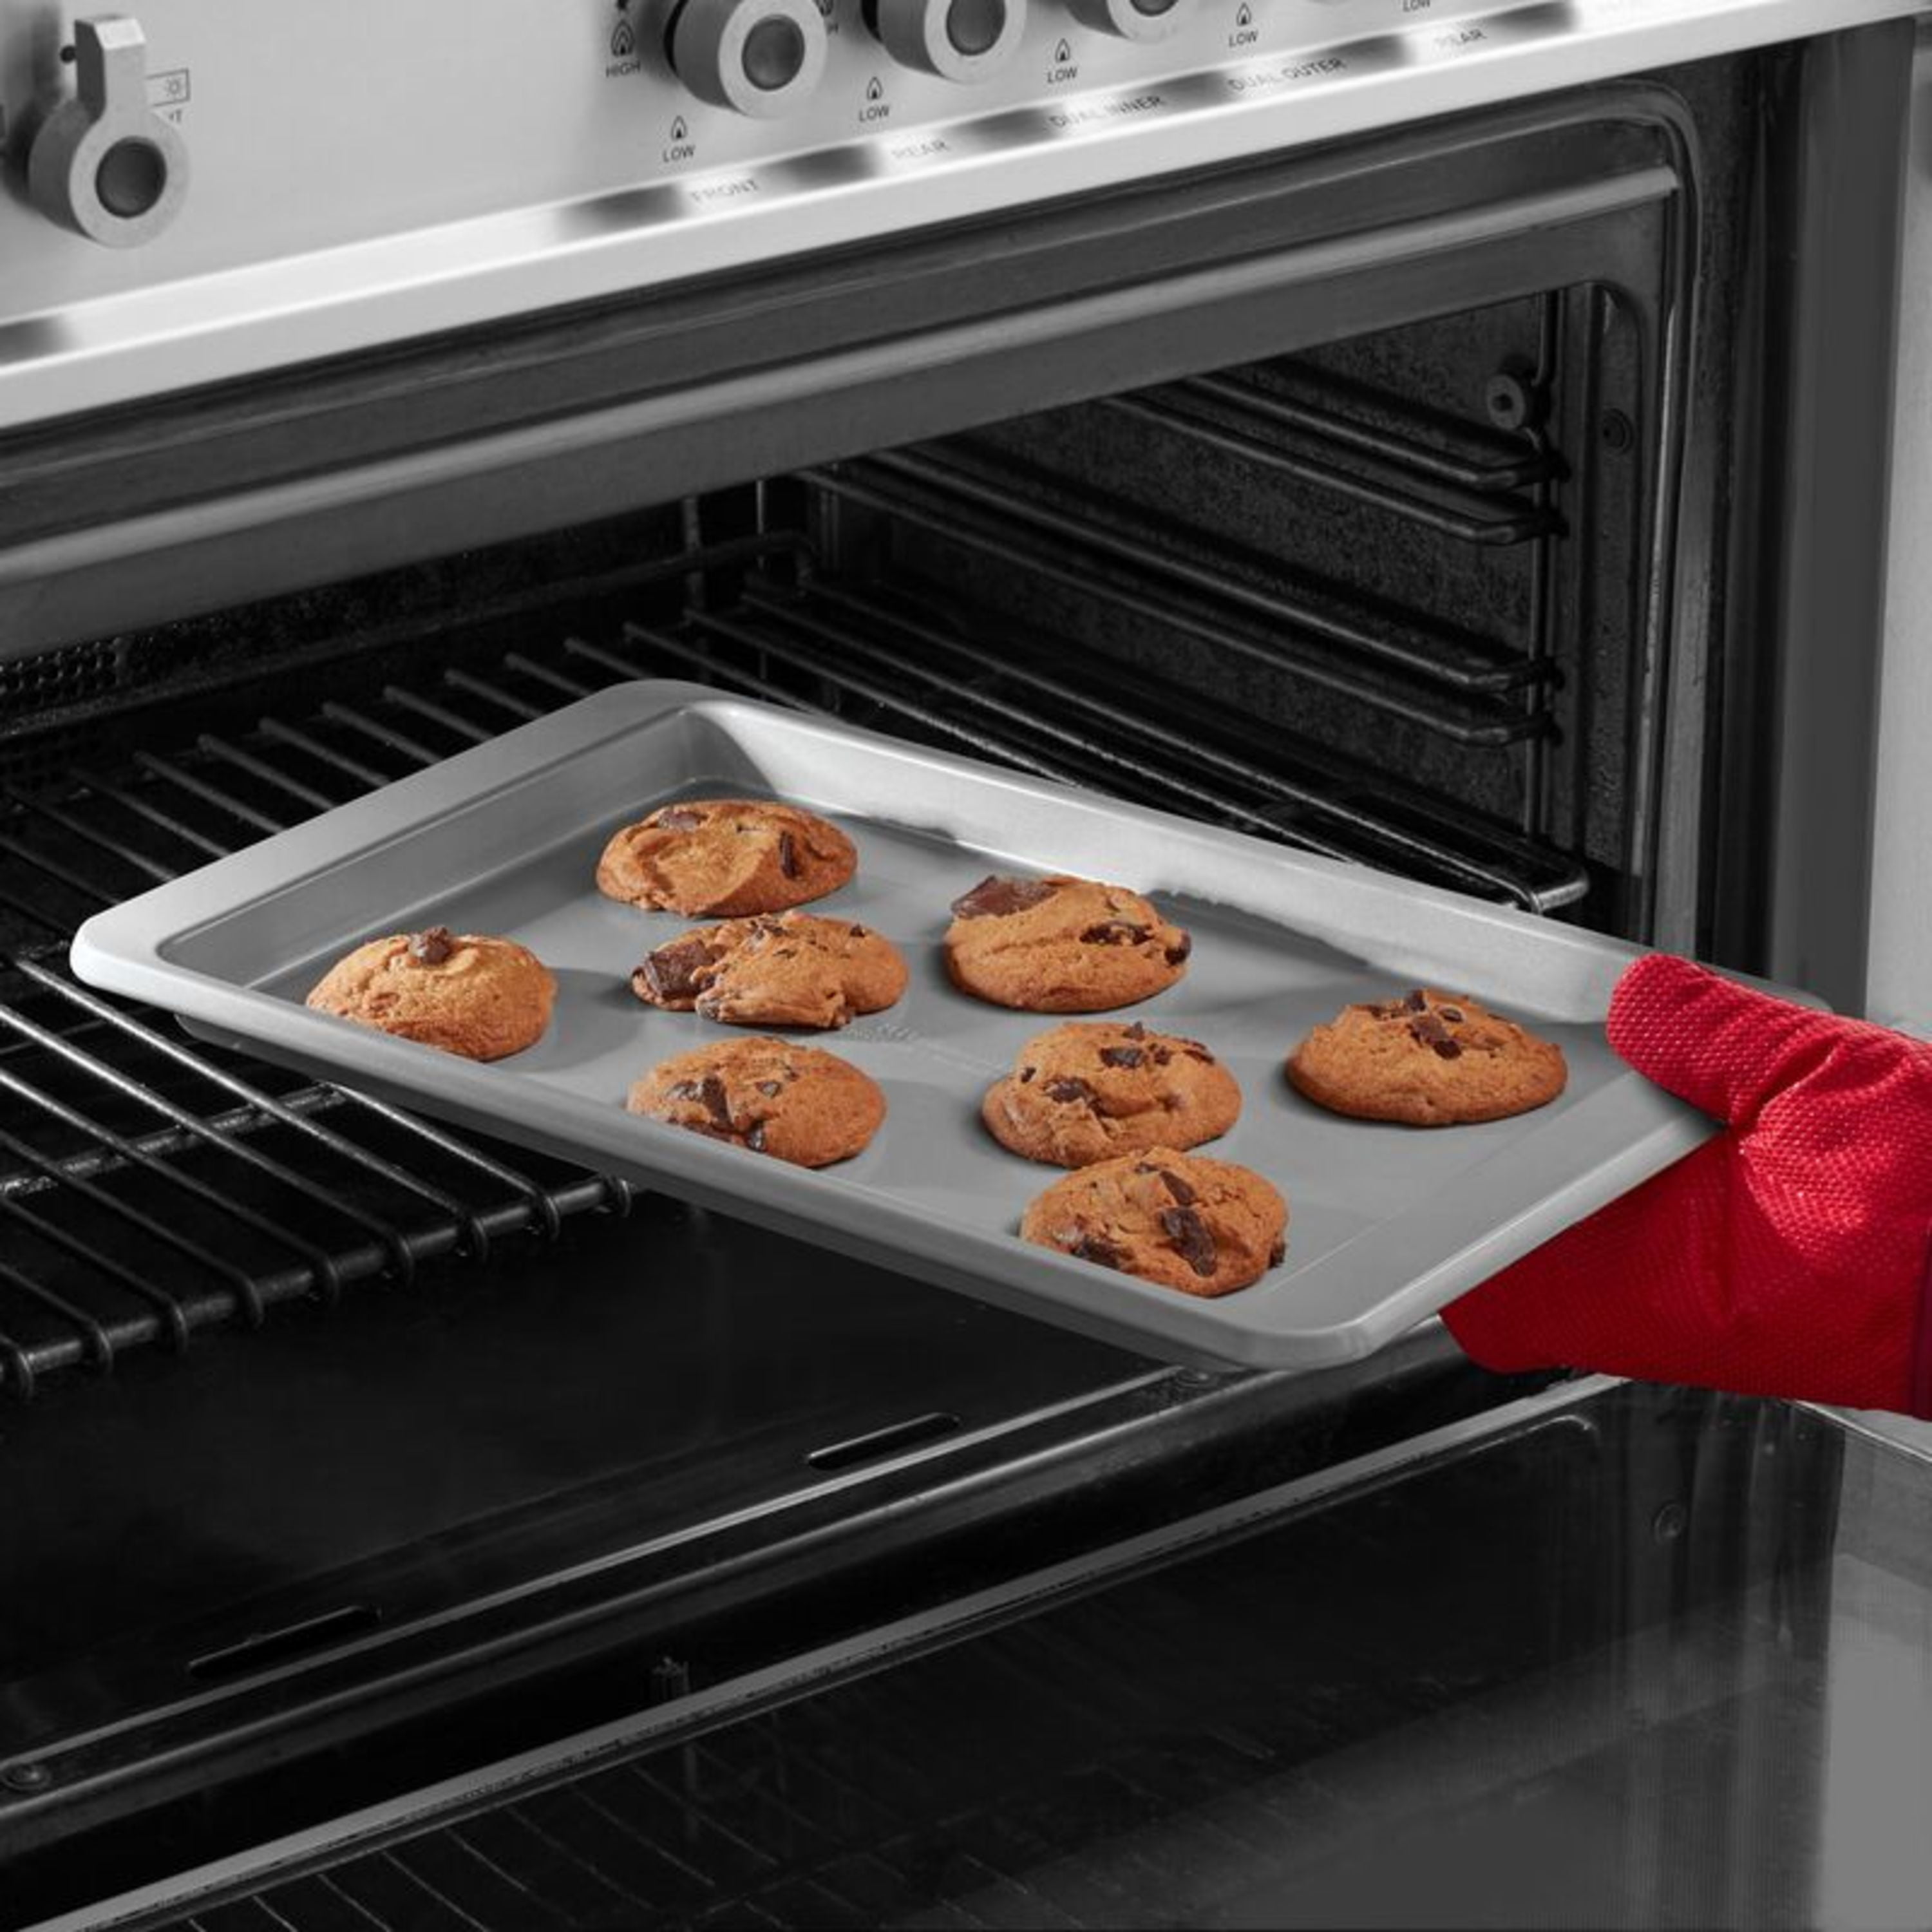 KitchenAid Nonstick 10 x 15 in Cookie Slider with Extended Handles for Easy  Grip, Aluminized Steel to Promoted Even Baking, Dishwasher Safe,Contour